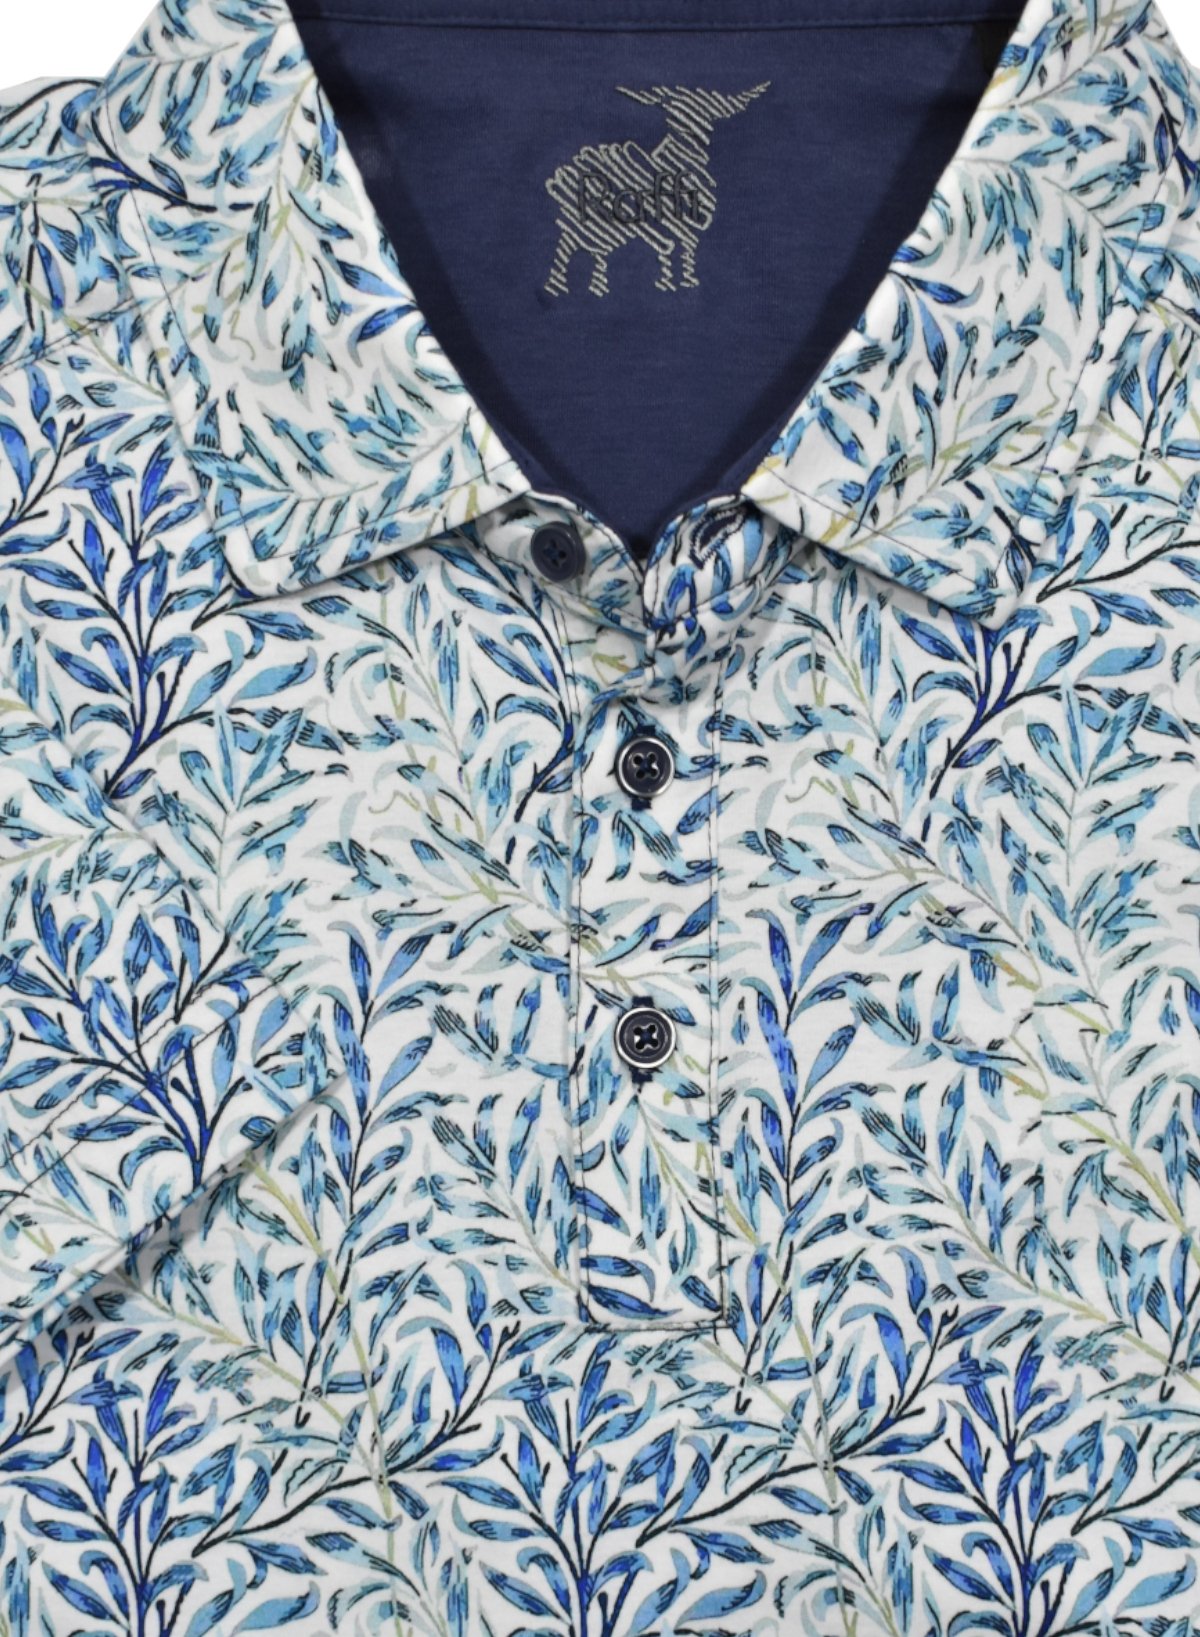 Experience ultimate comfort and style with the ZR24146 Raffi Indigo Floral Polo. Made with the sought after aqua cotton fabric, this polo is superb to the touch. The abstract print pattern in trend blue colors and self collar model add a modern and trendy touch. Upgrade your wardrobe with this must-have piece.